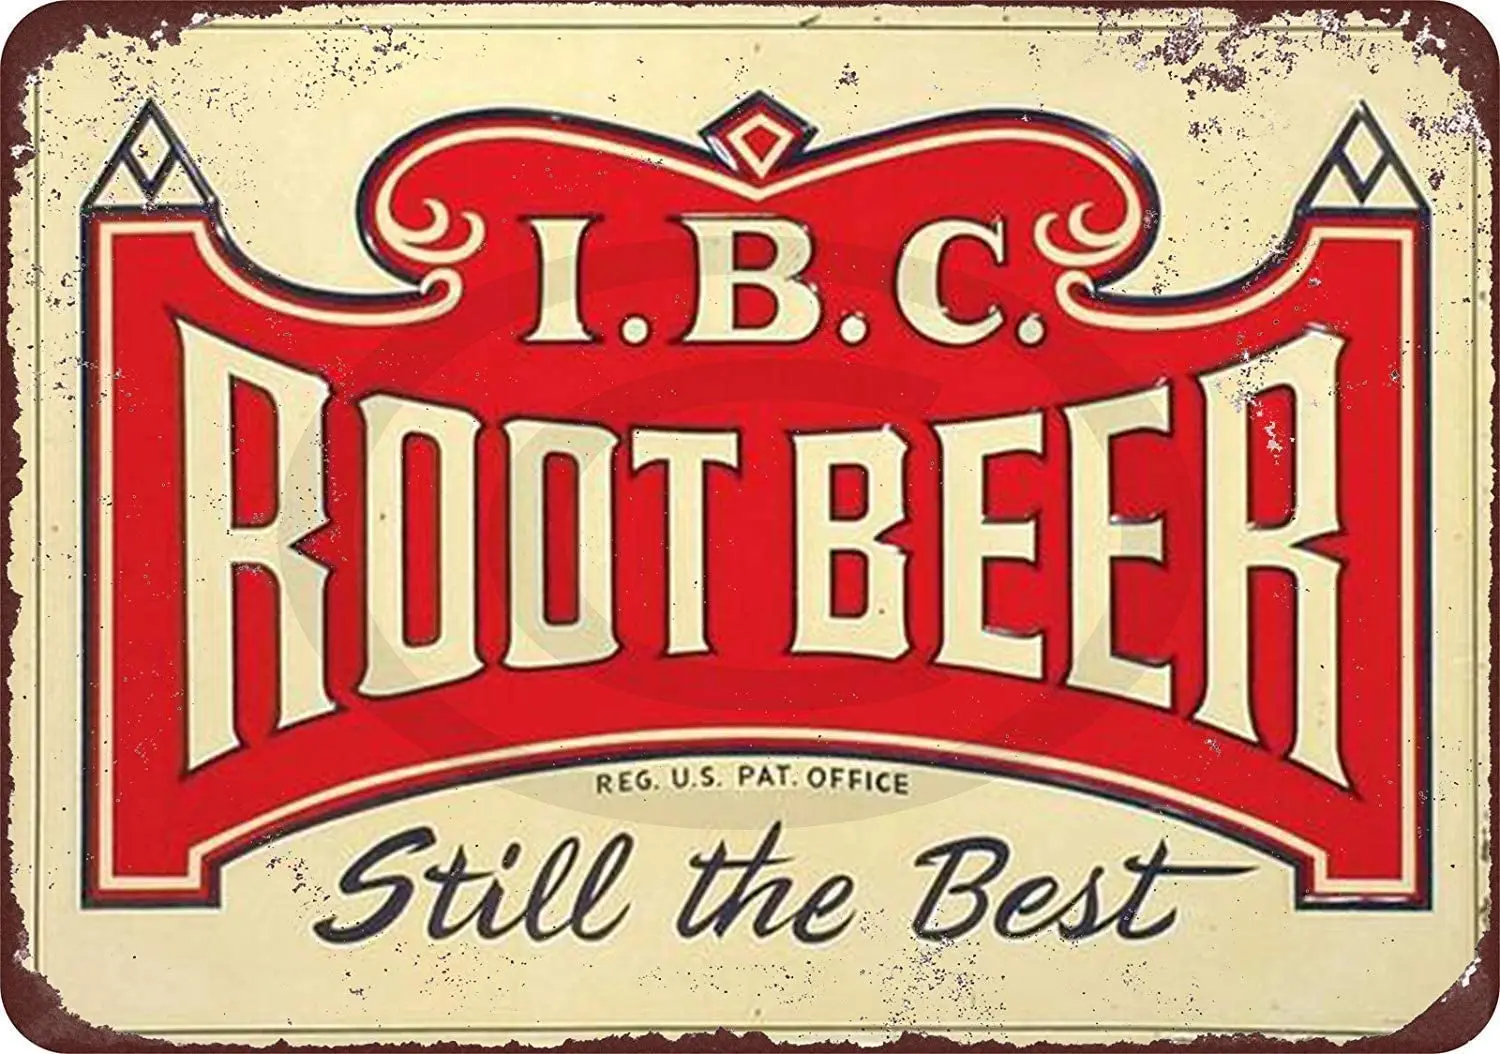 

IBC Root Beer Still The Best Look Retro Metal Tin Sign Plaque Poster Wall Decor Art Shabby Chic Gift